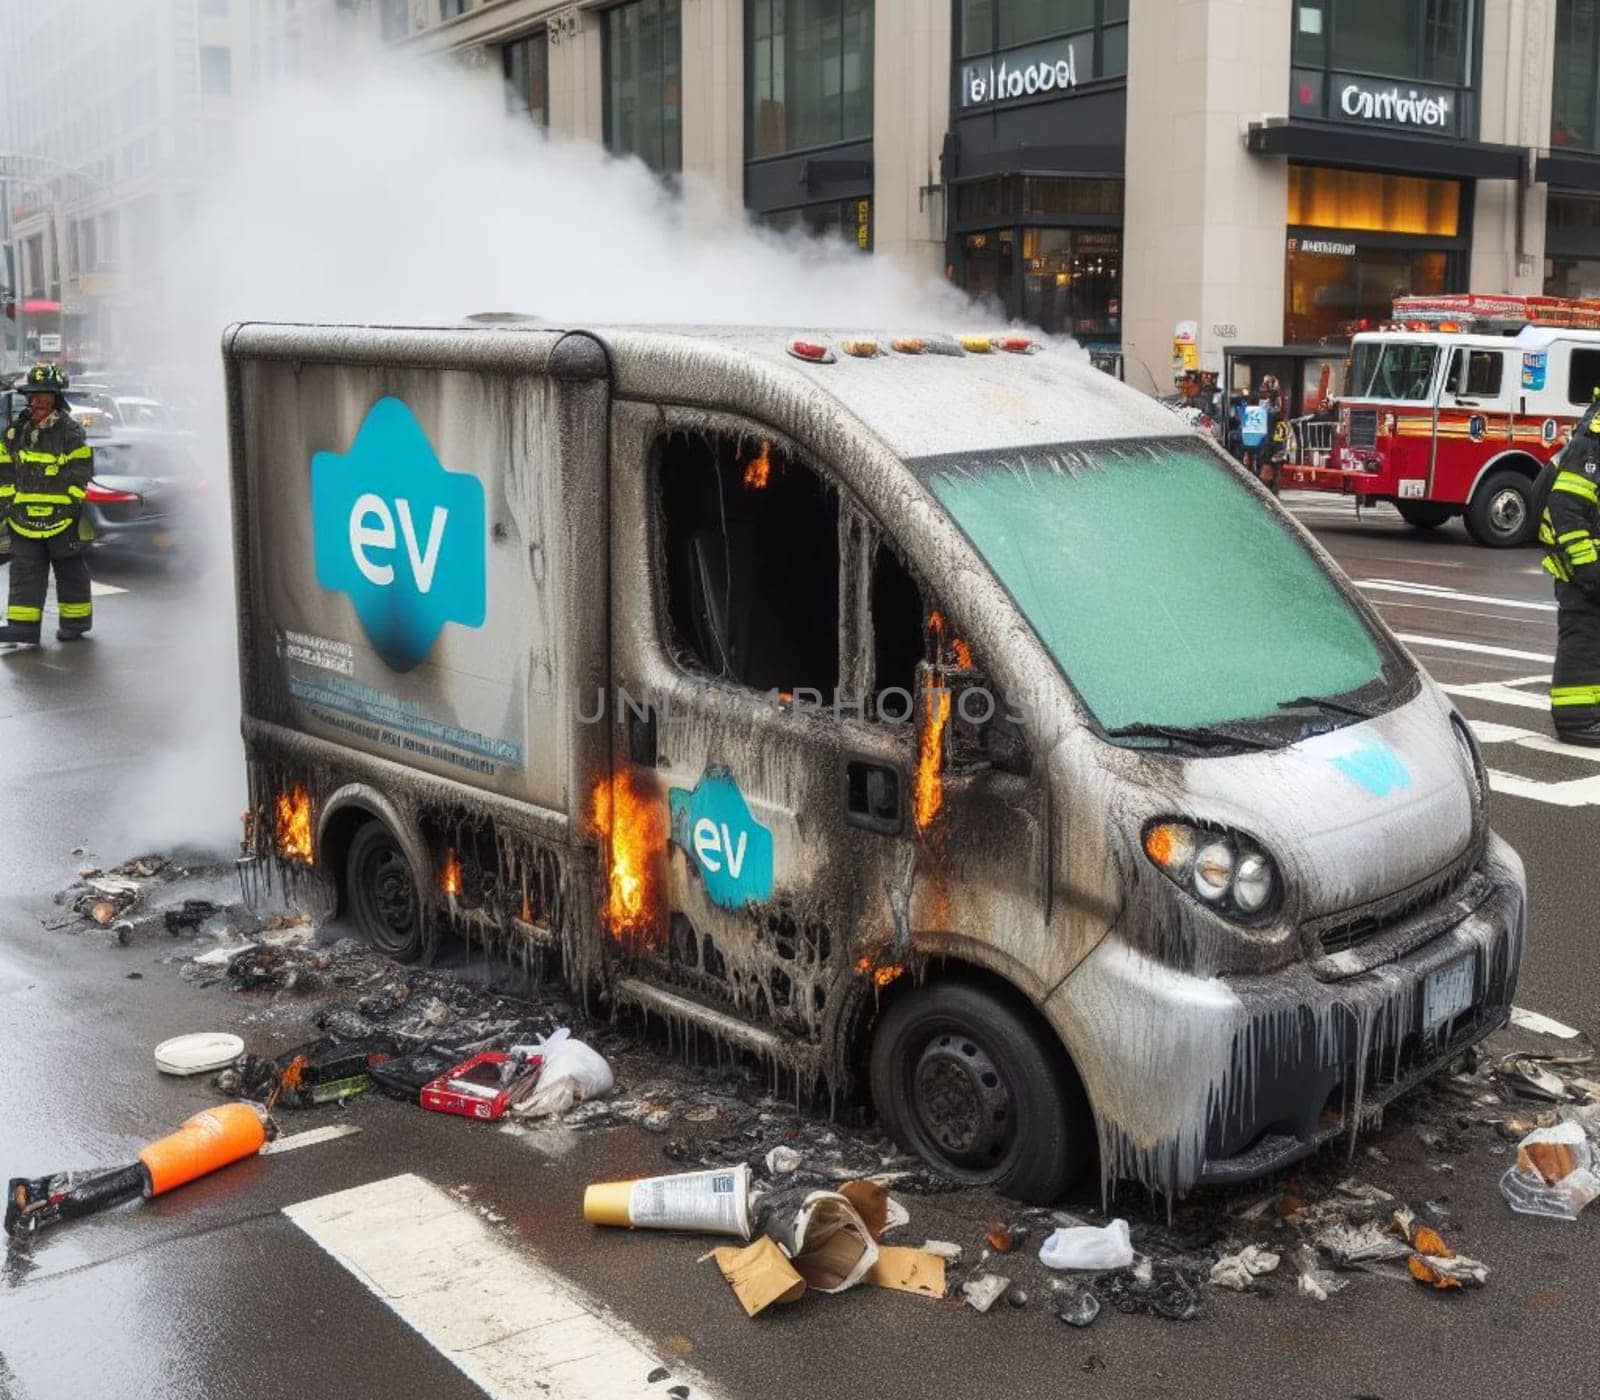 electric hybrid cargo courier truck burning, firefighter apply foam to extinguish flames big smoke by verbano